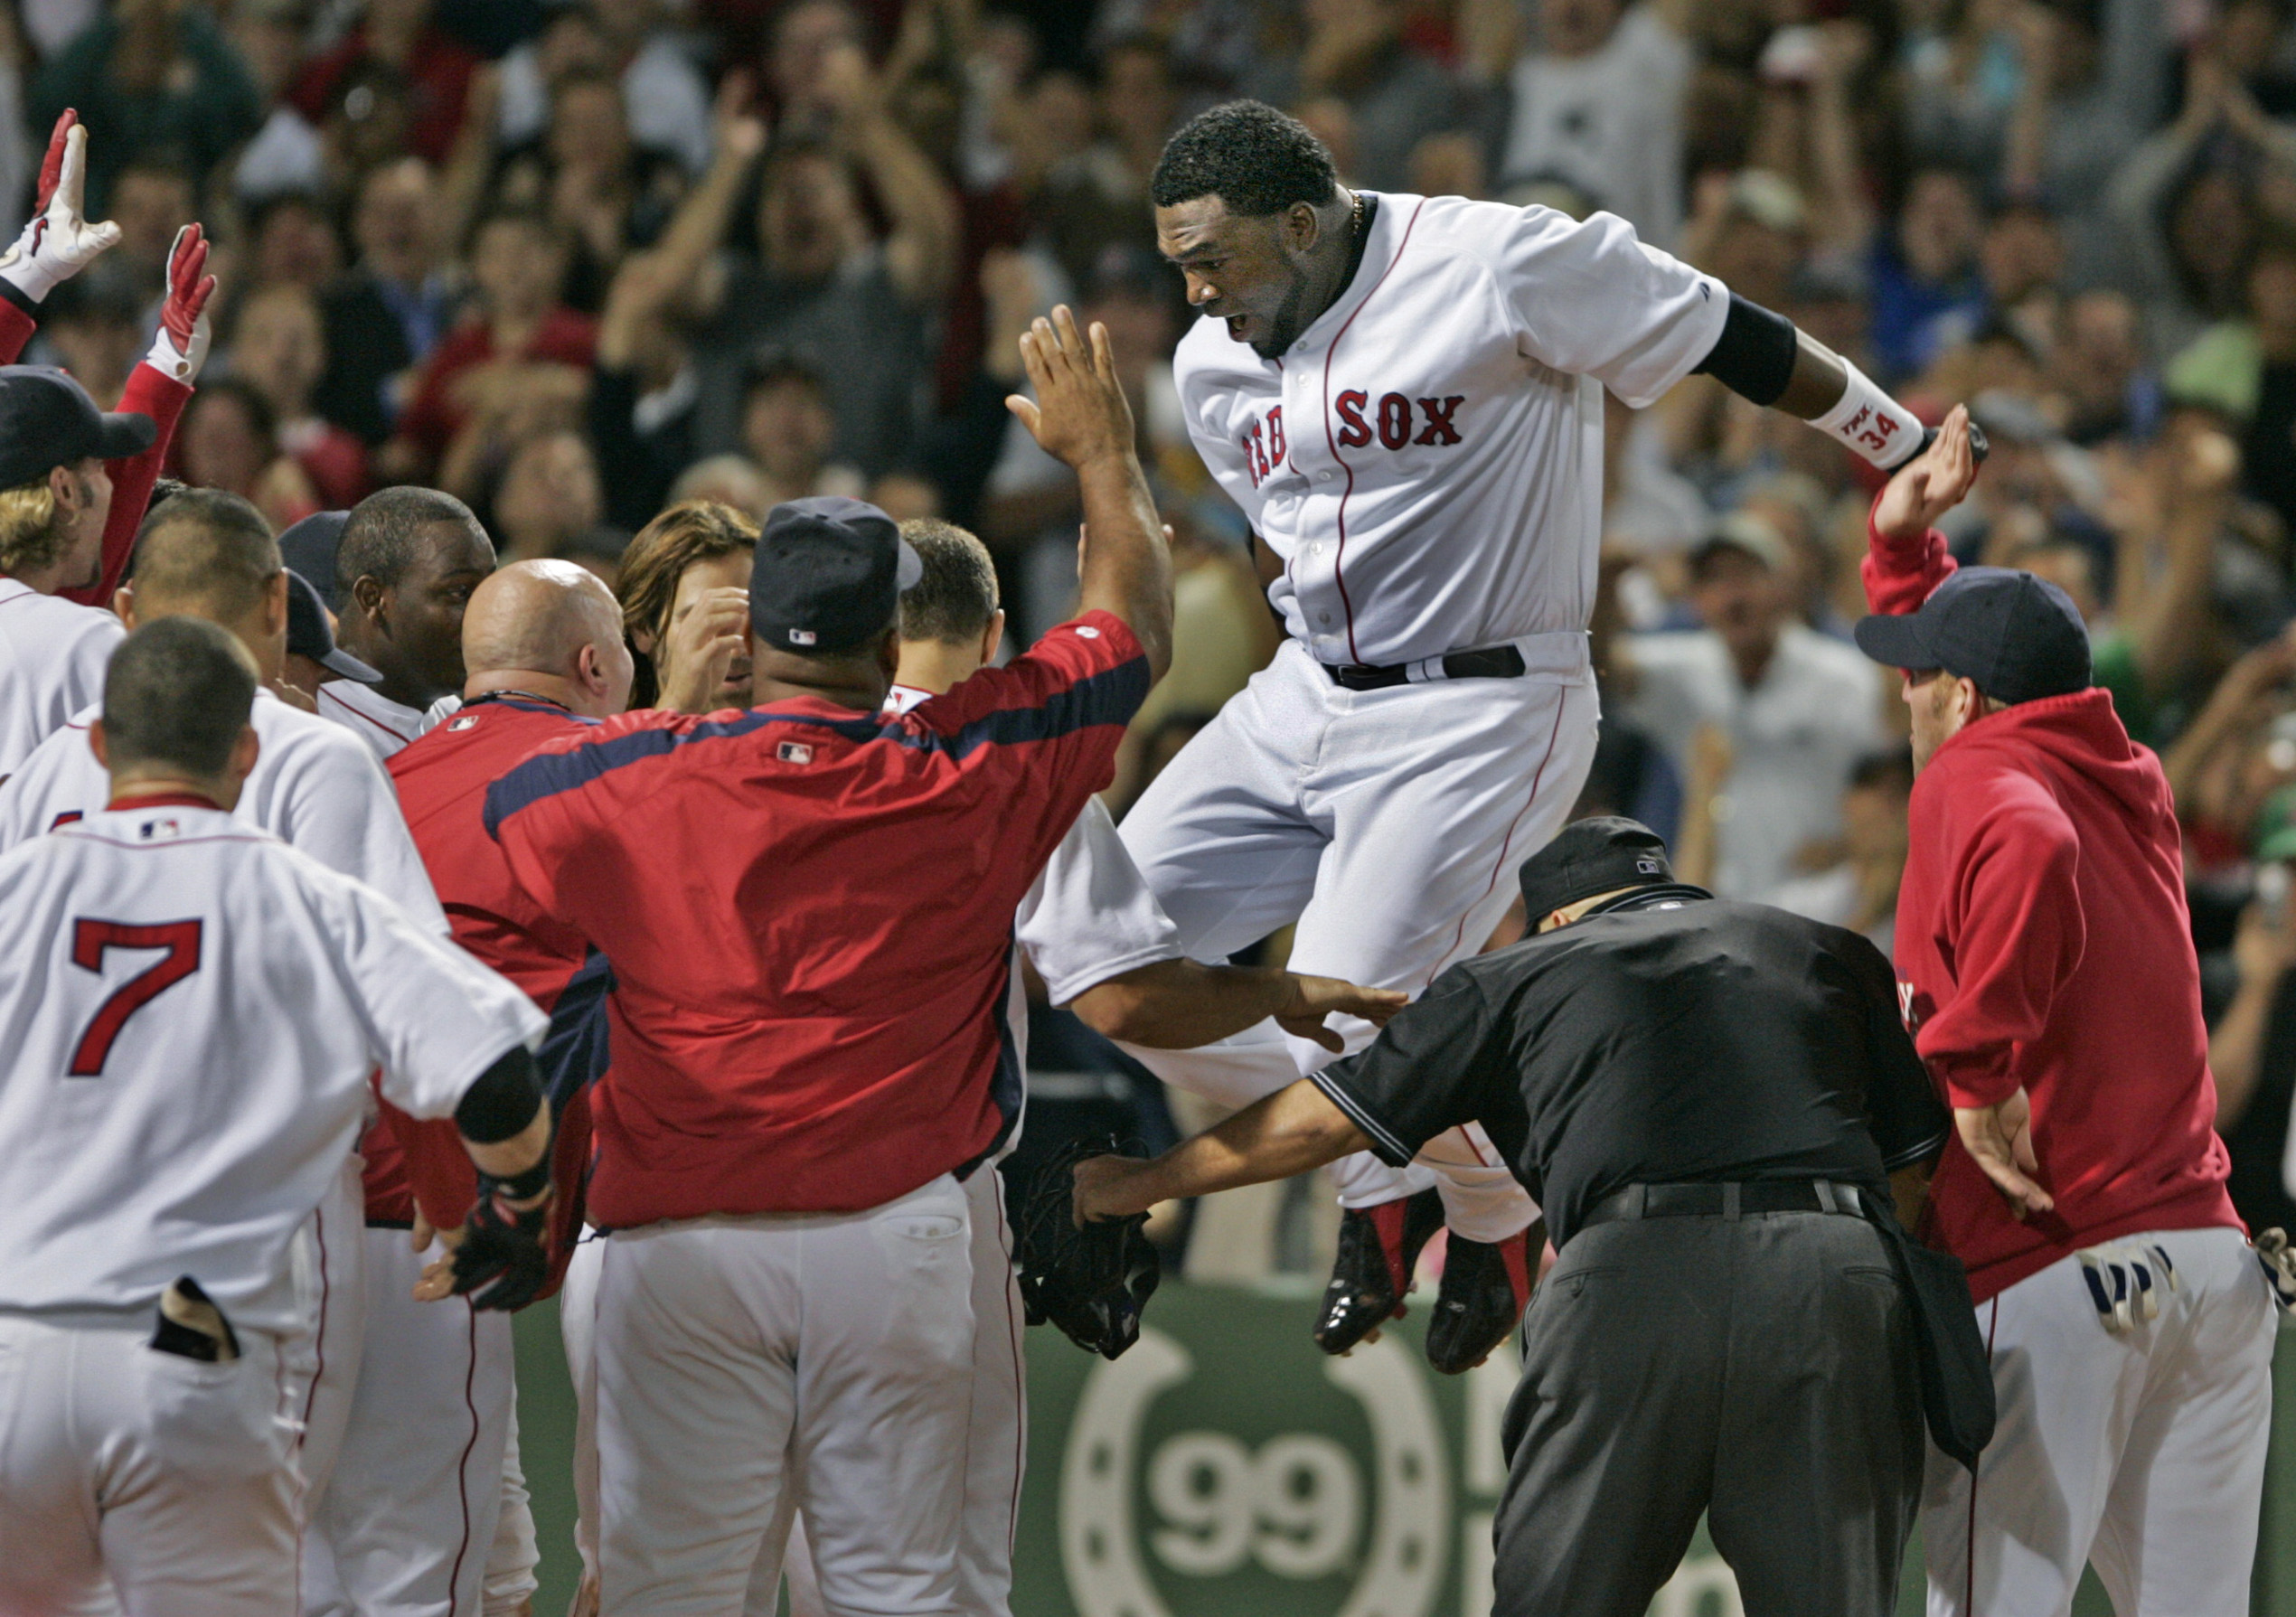 Ortiz hit 48 home runs in the 2005 season, including this one on Sept. 6, a walkoff to beat the Angels.